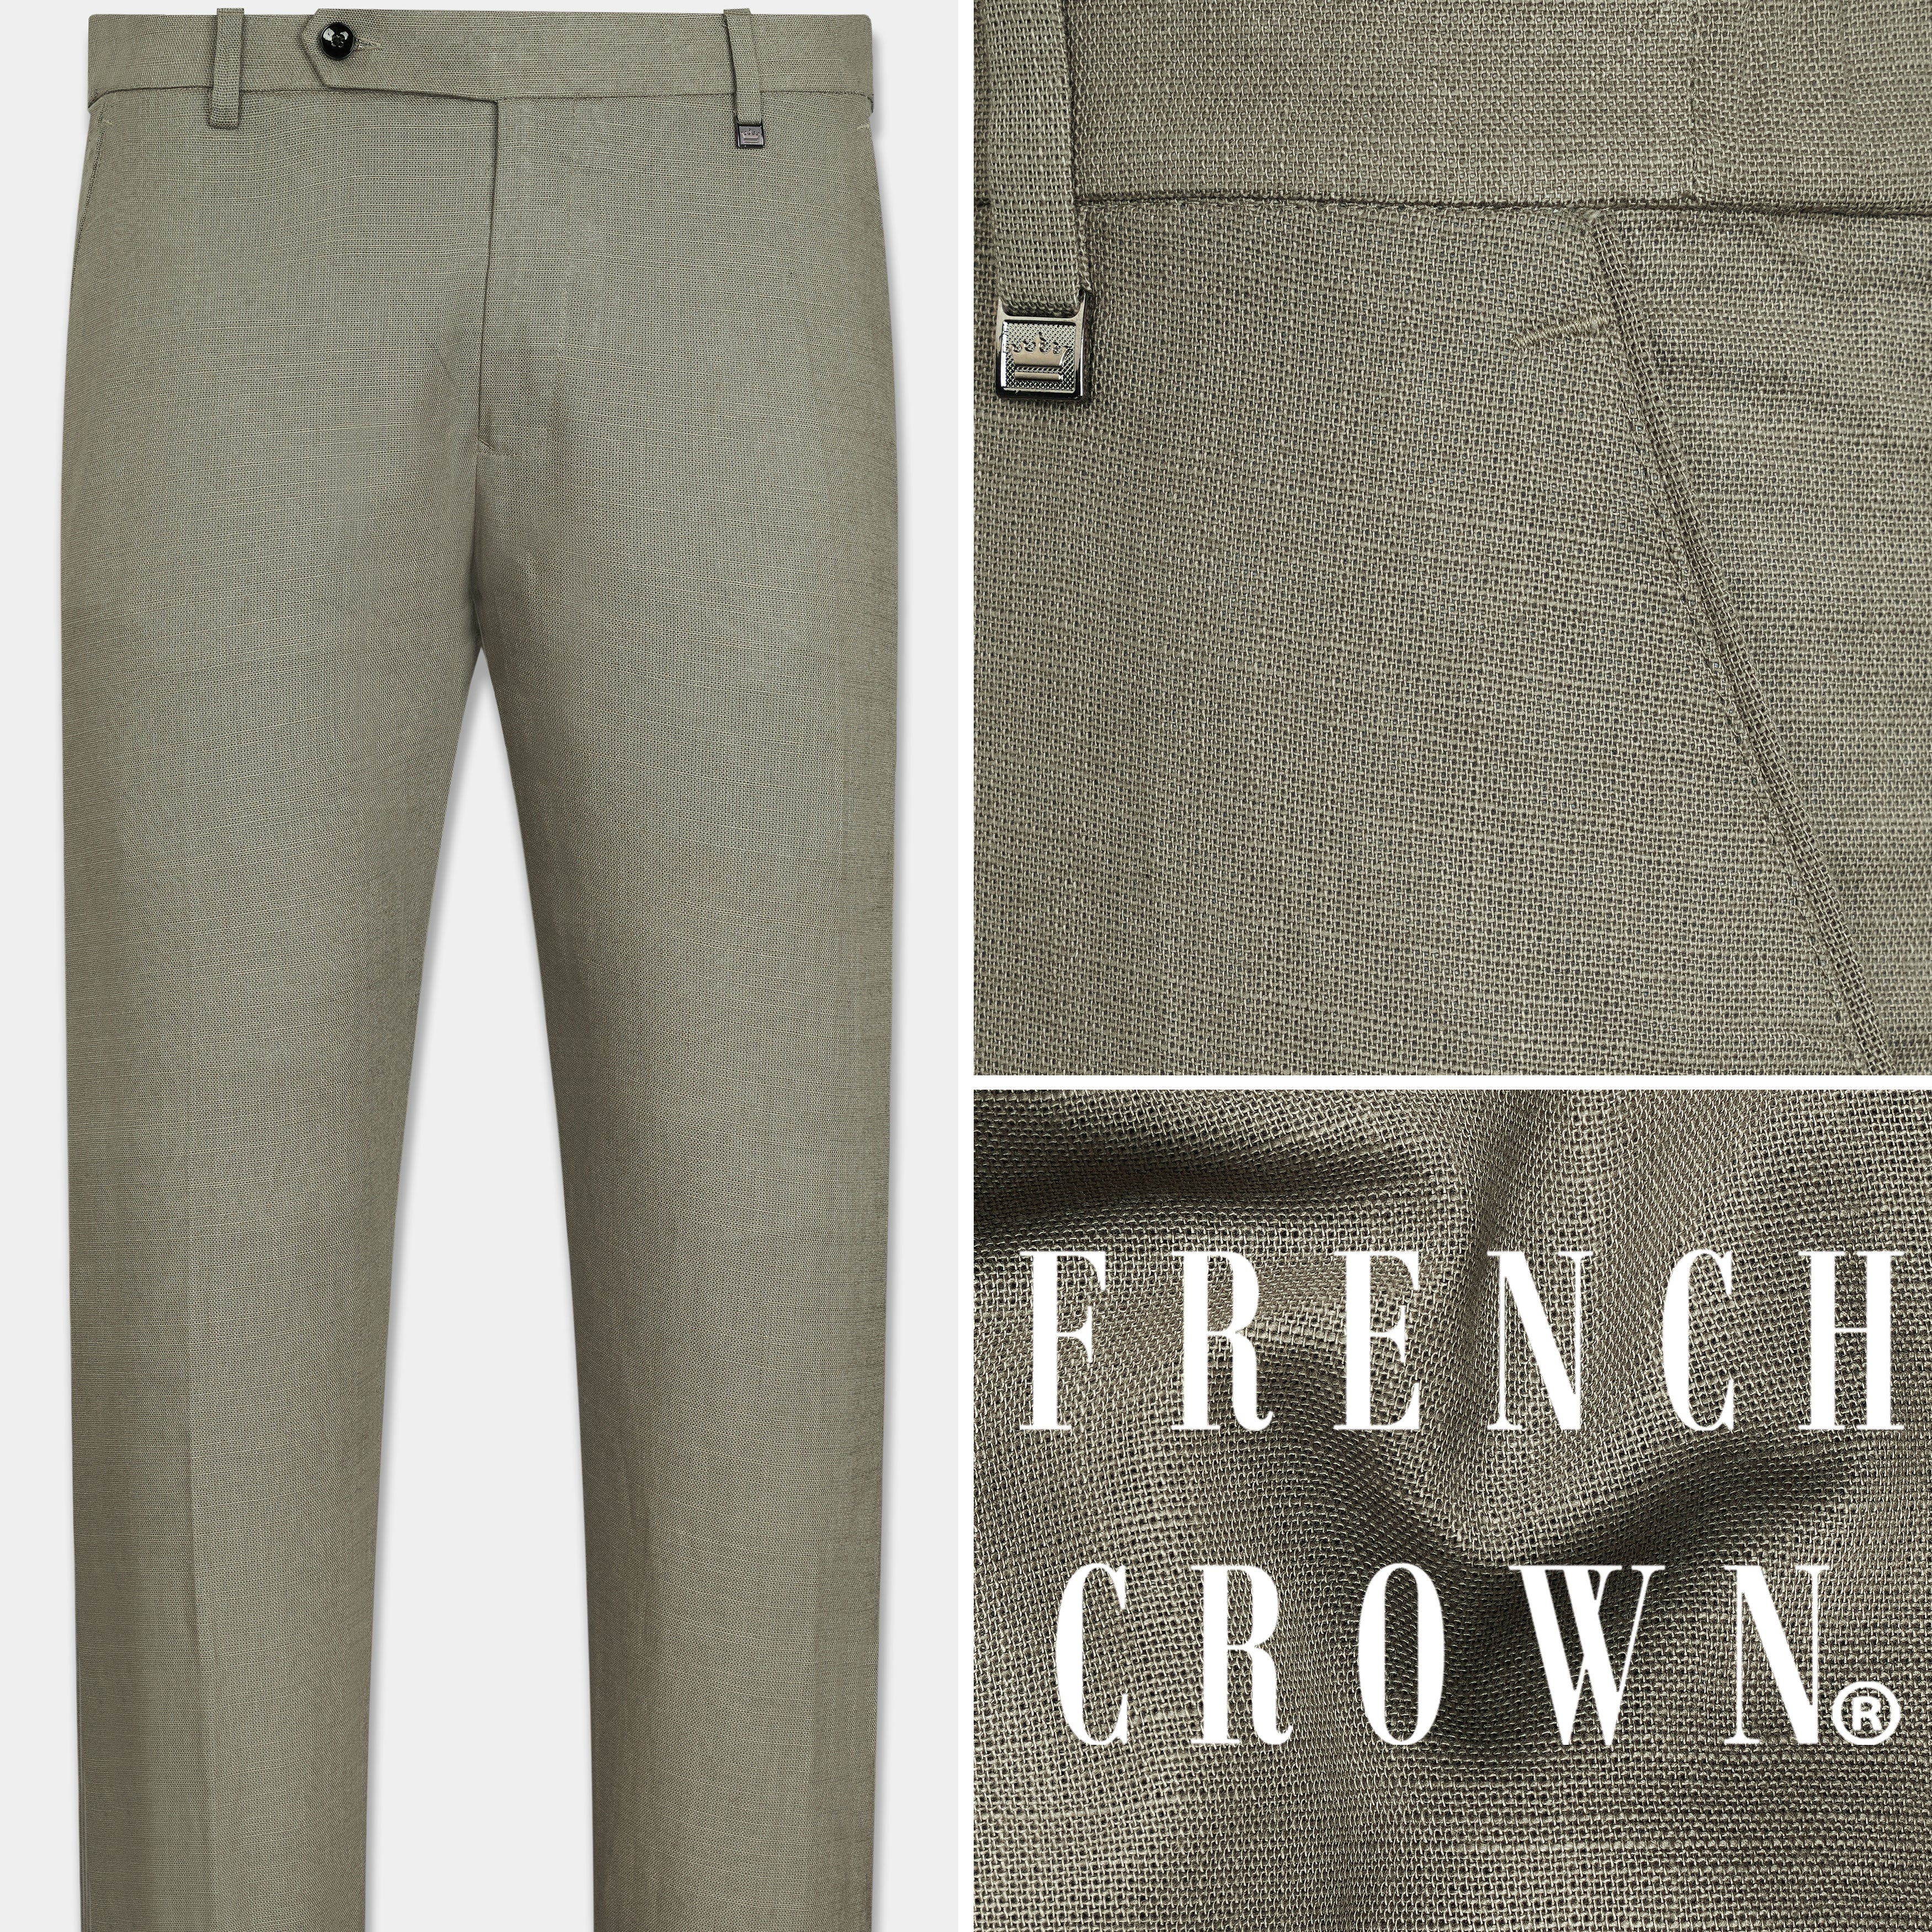 Buy FRENCH CROWN Men's Green Pure Cotton Regular Fit Formal Trouser  (Size-32/X Large) at Amazon.in